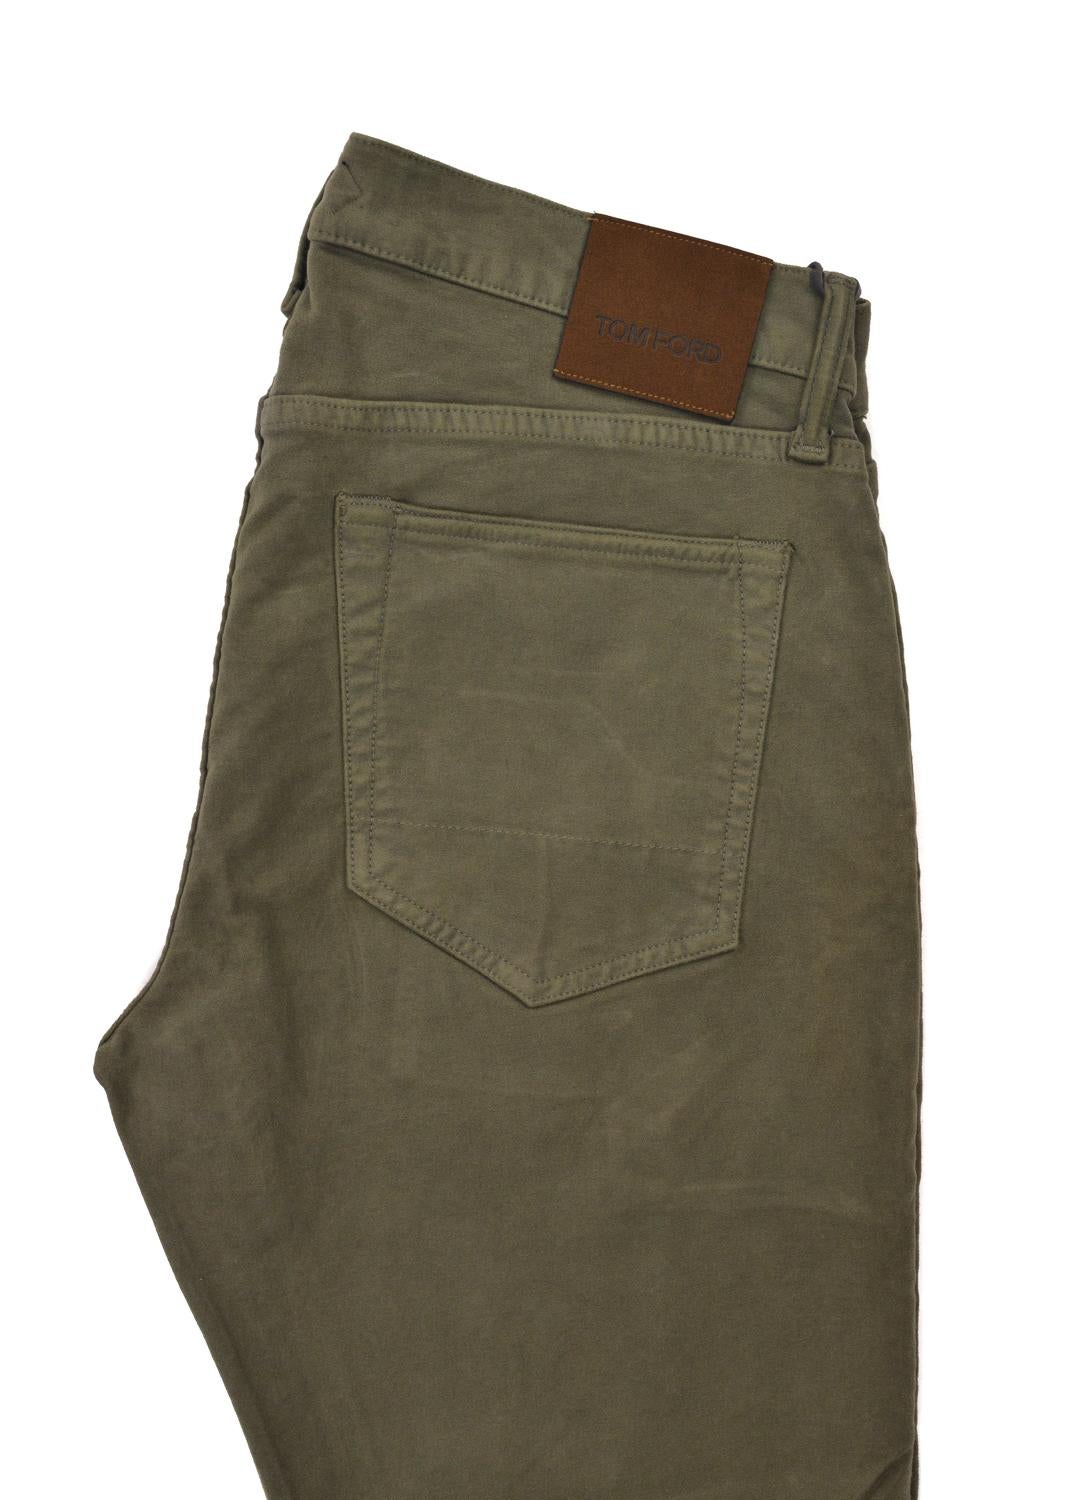 Tom Ford Men's Light Olive Green Cotton Slim Jeans In New Condition For Sale In Brooklyn, NY